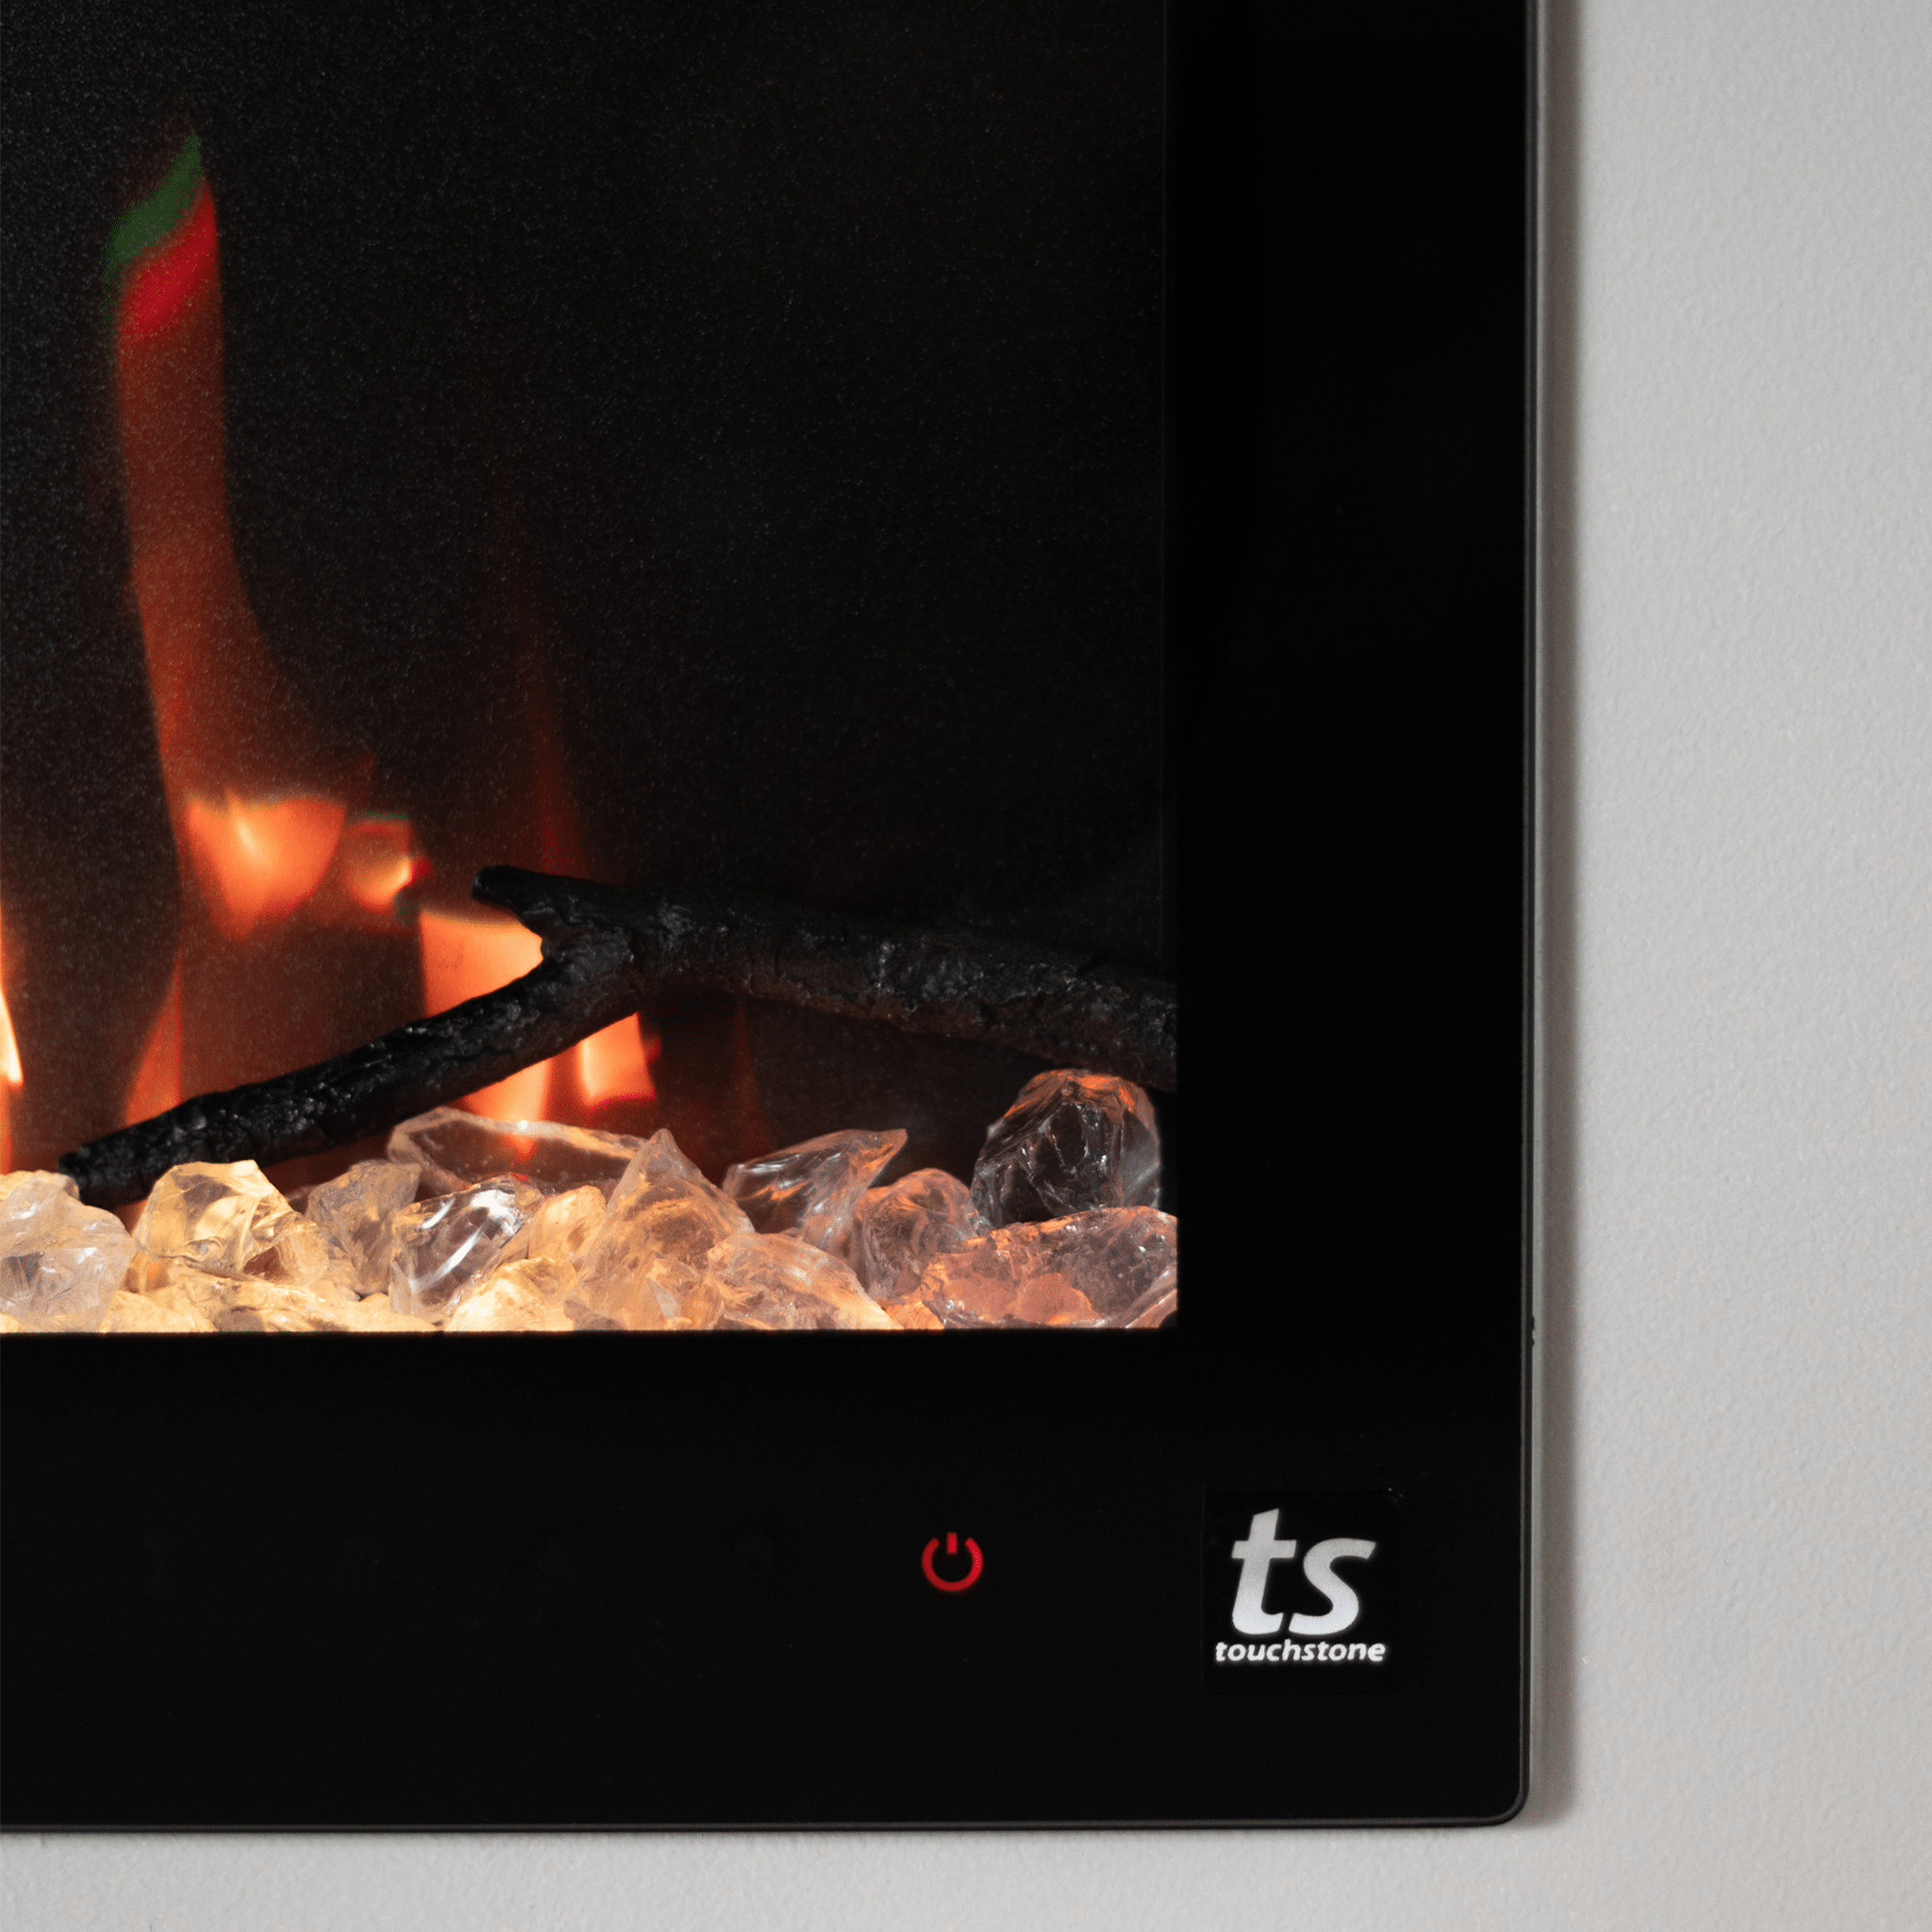 Sideline Fury 57 Inch Electric Fireplace close up shot